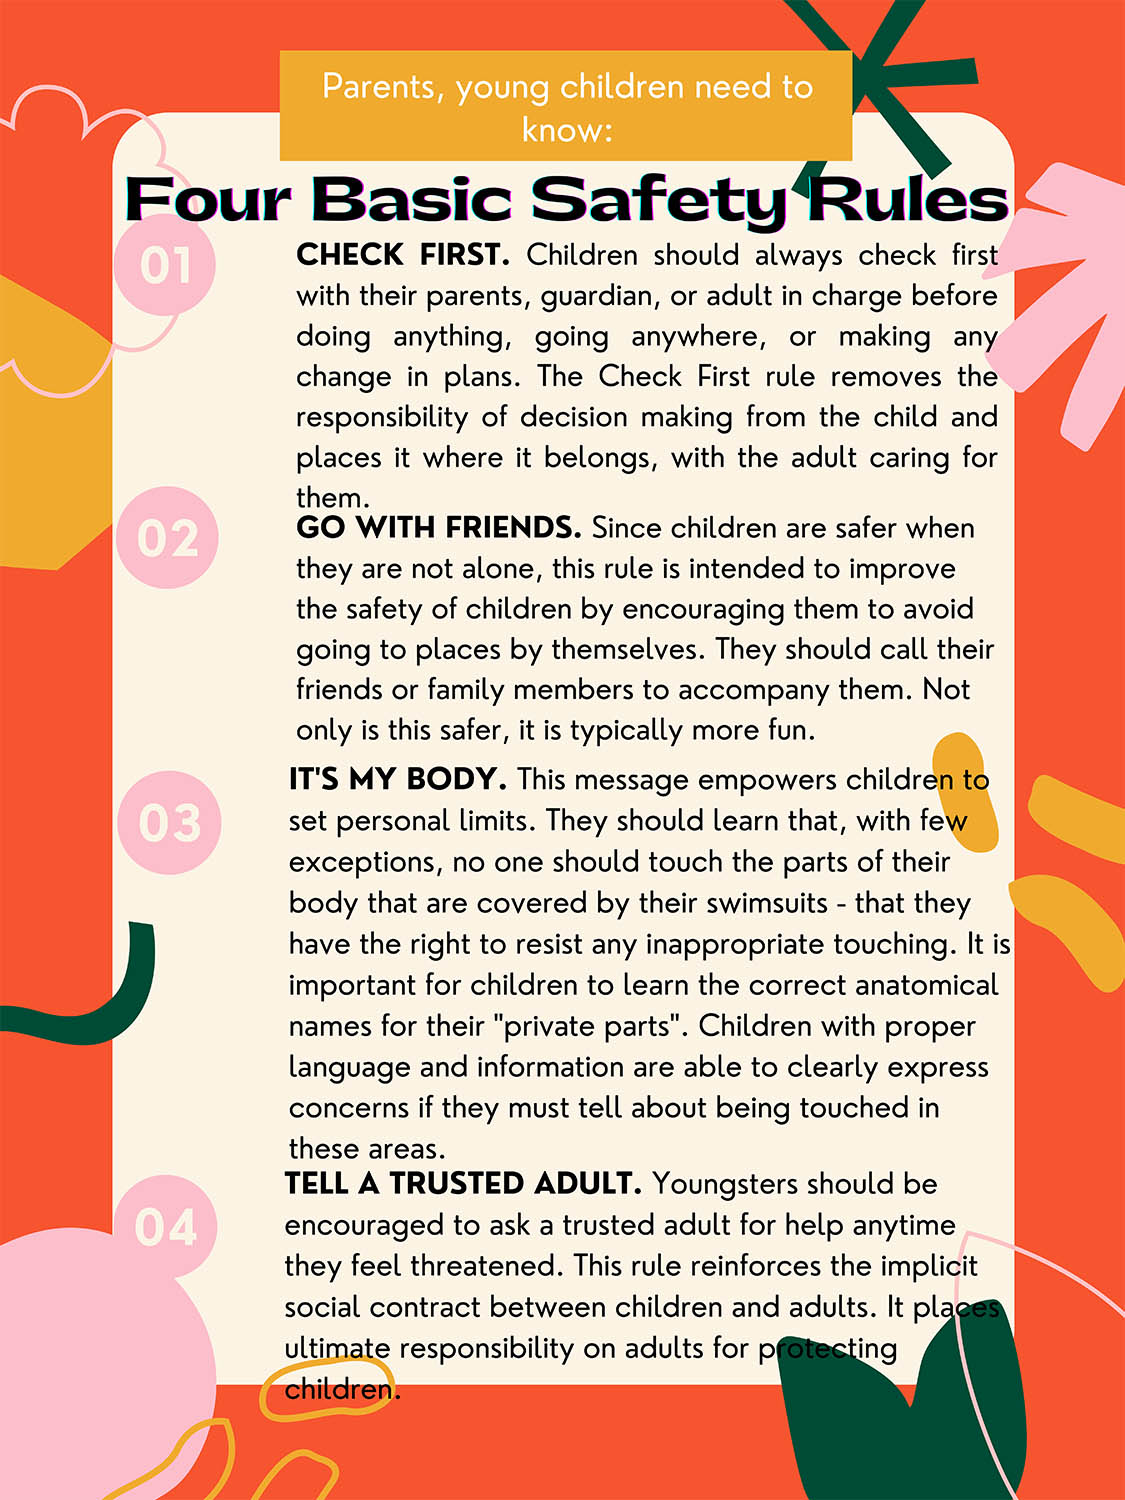 Four Basic Safety Rules for Parents to Teach Young Children